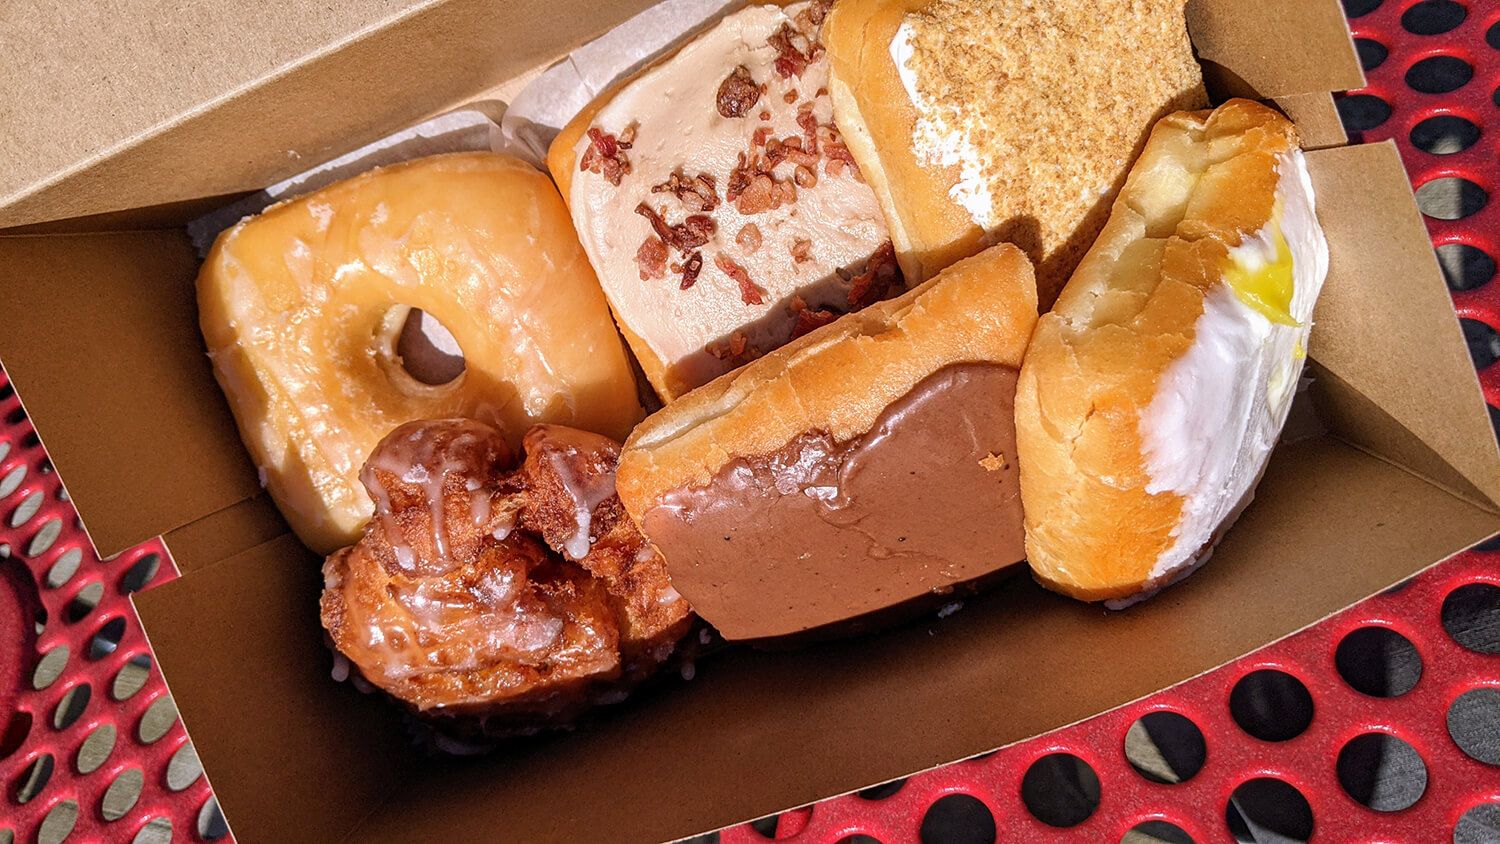 6. Square Donuts